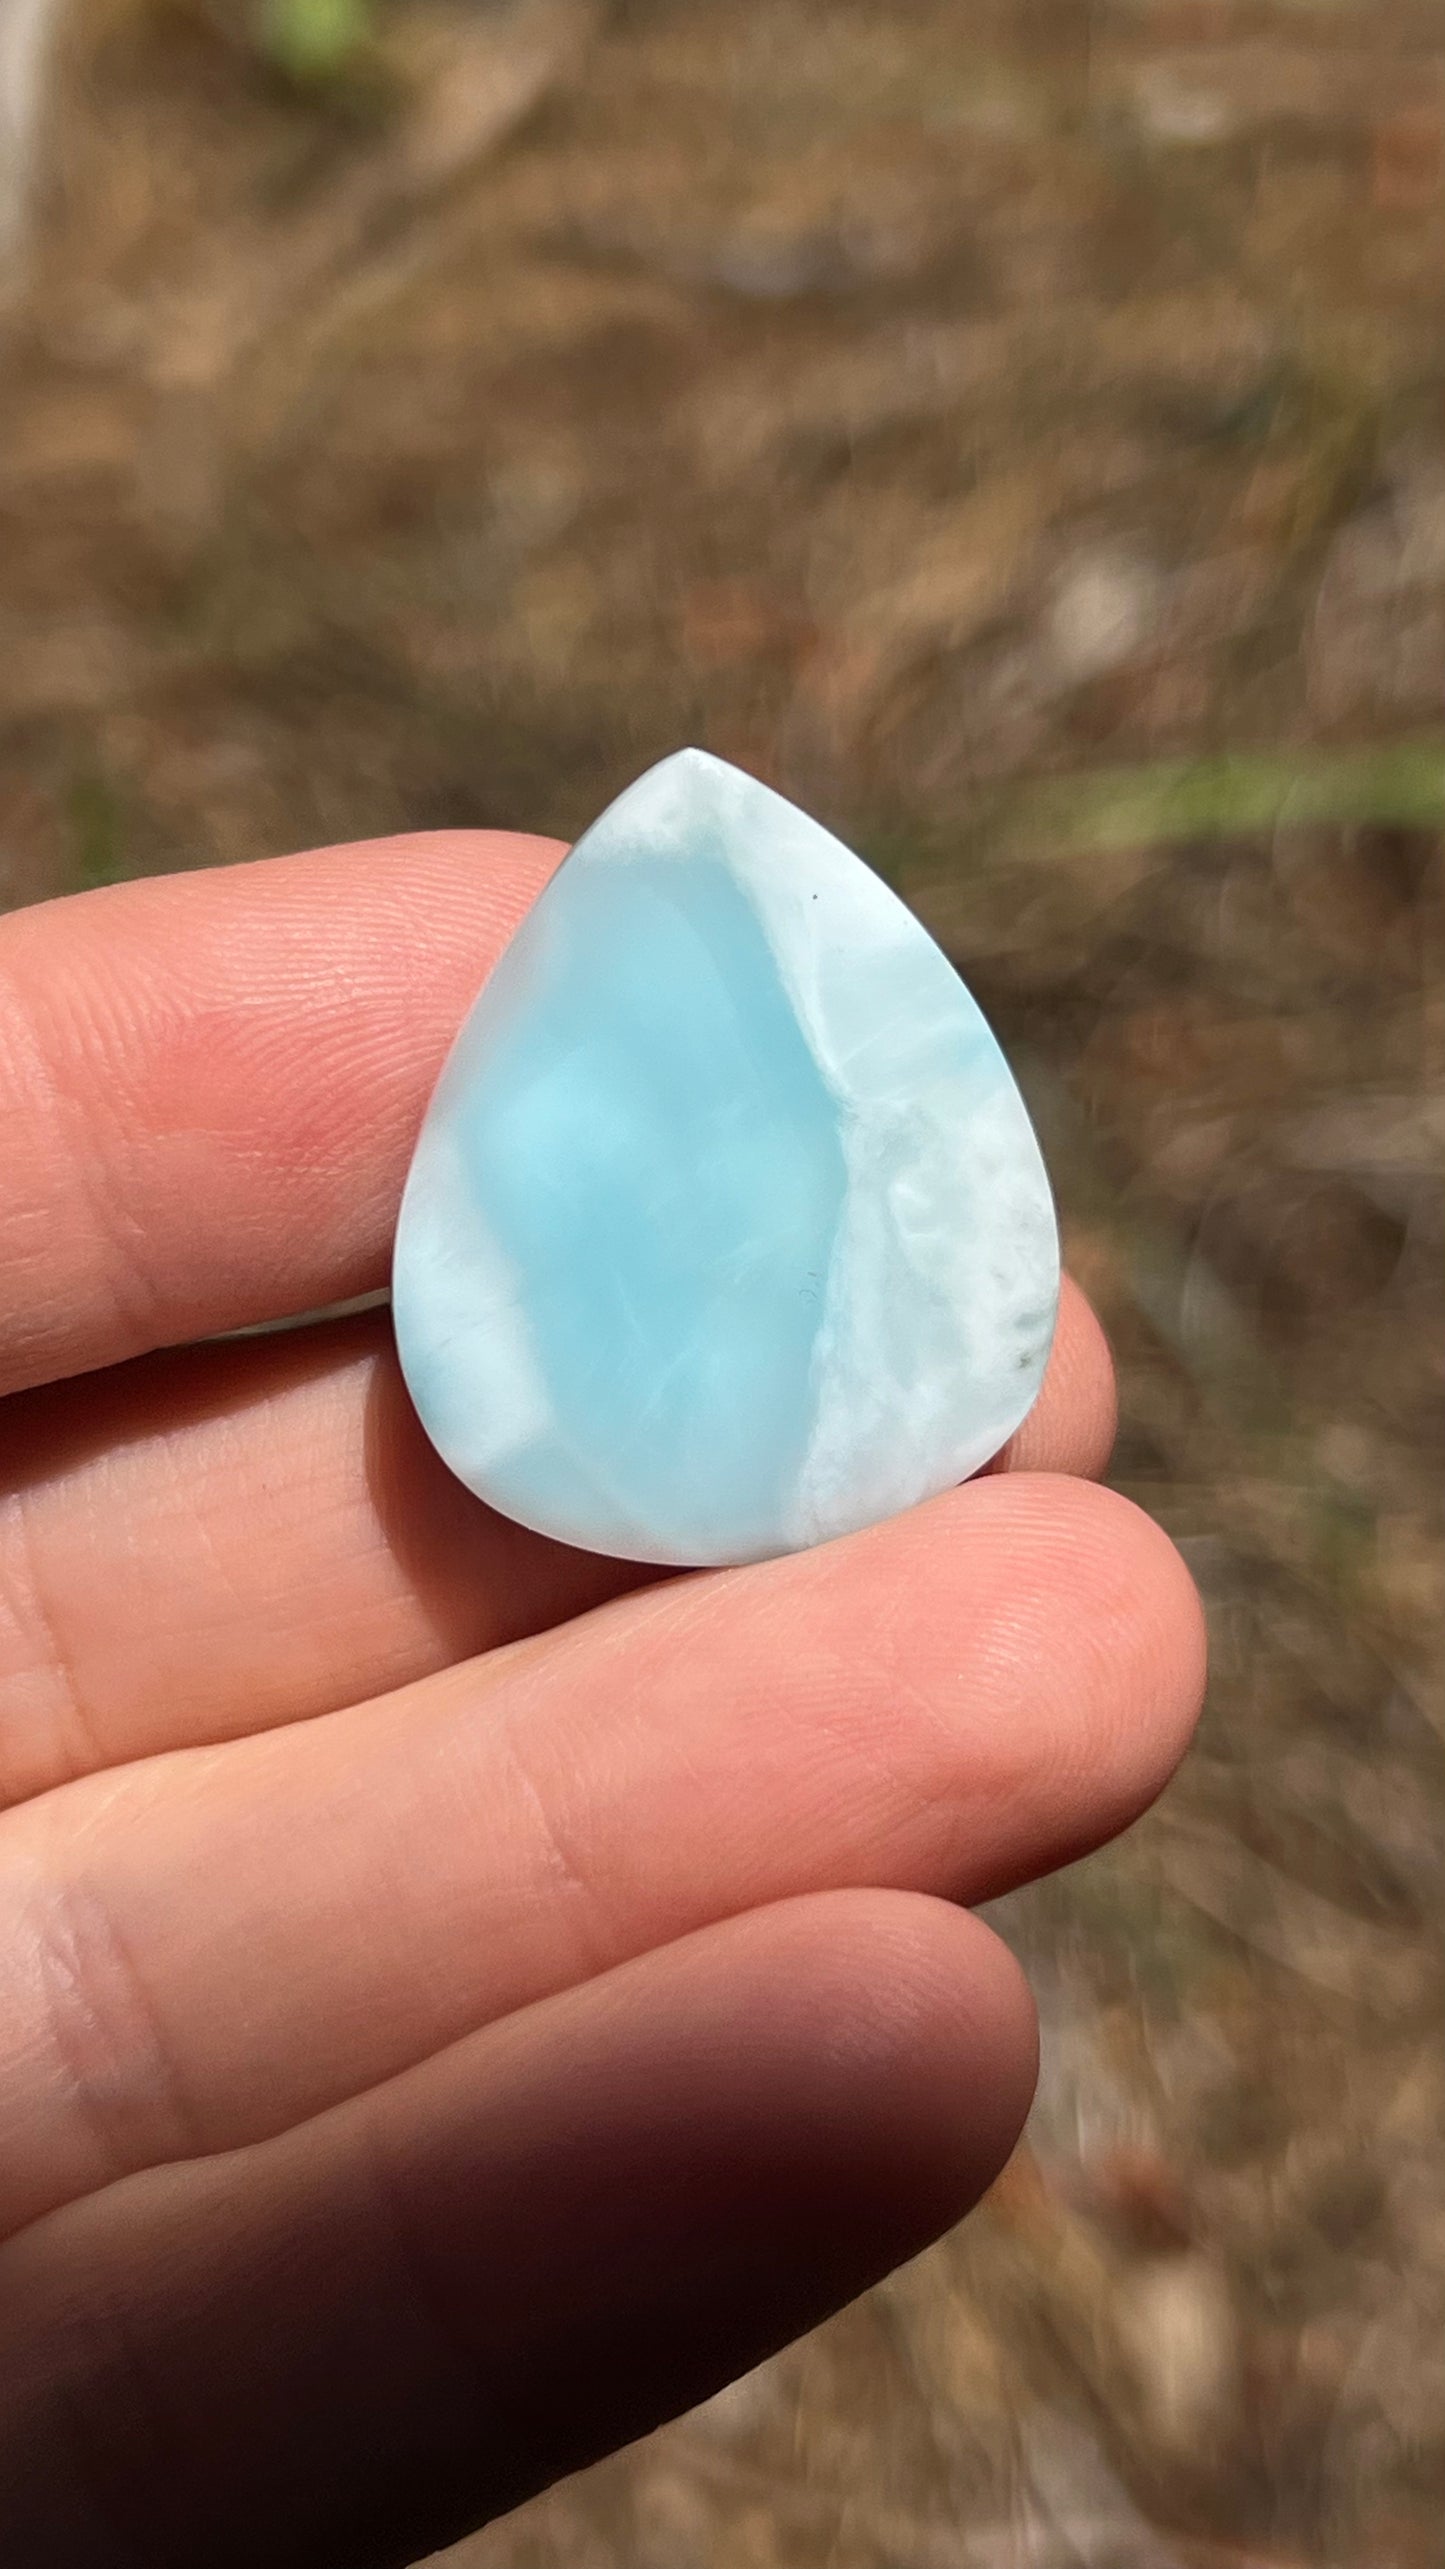 Larimar Cabochon, 8.5g Dominican Republic, AAA High Quality